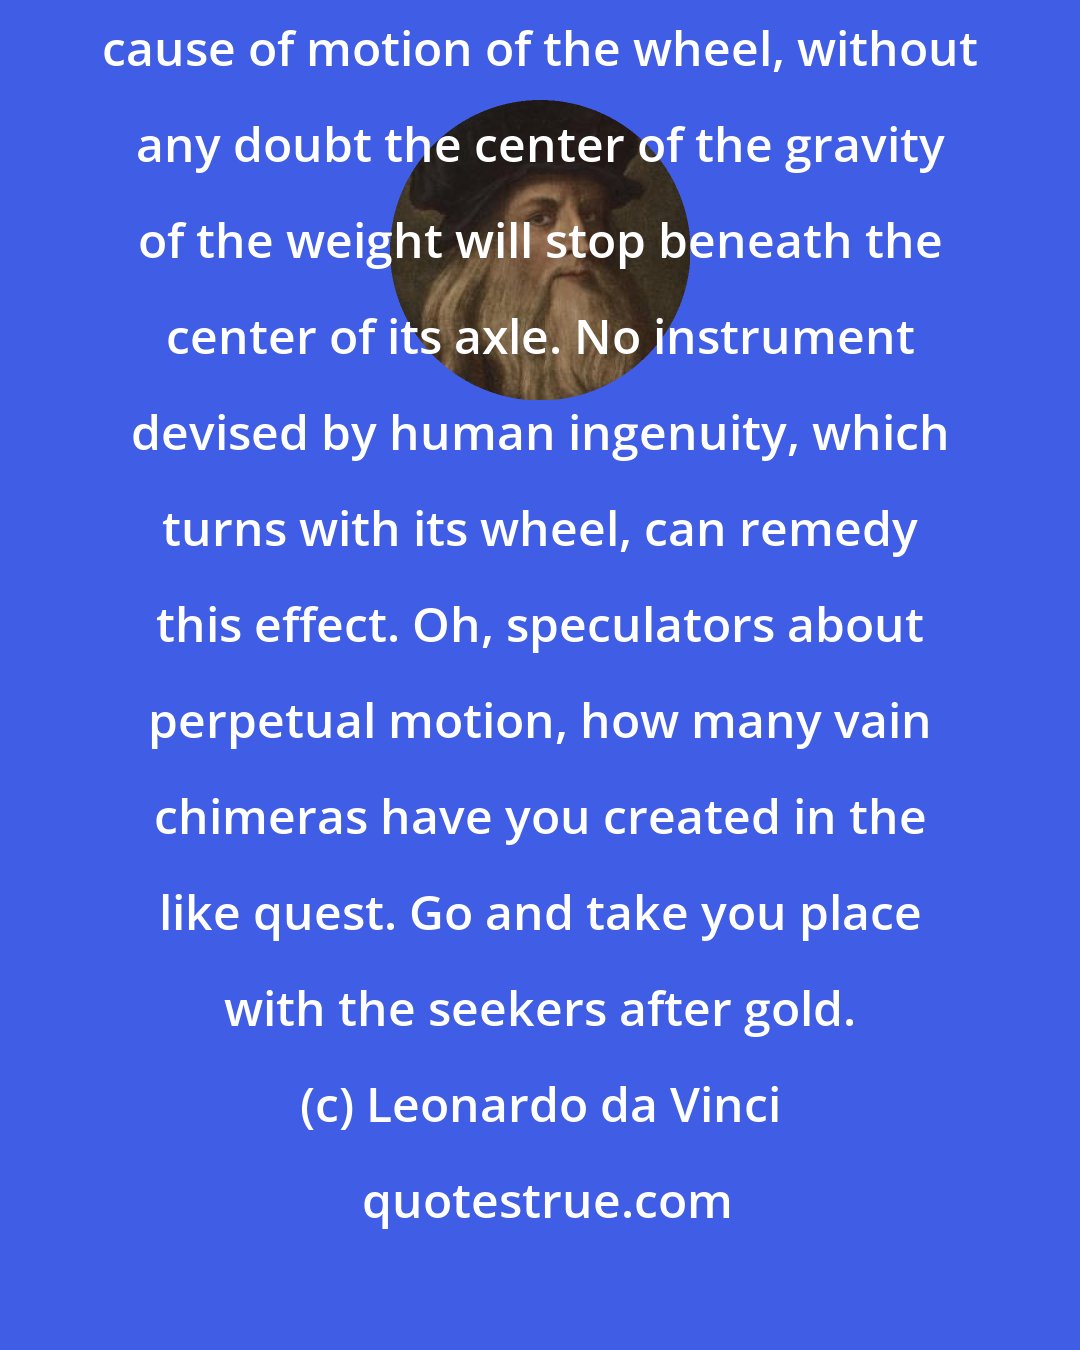 Leonardo da Vinci: In whatever system where the weight attached to the wheel should be the cause of motion of the wheel, without any doubt the center of the gravity of the weight will stop beneath the center of its axle. No instrument devised by human ingenuity, which turns with its wheel, can remedy this effect. Oh, speculators about perpetual motion, how many vain chimeras have you created in the like quest. Go and take you place with the seekers after gold.